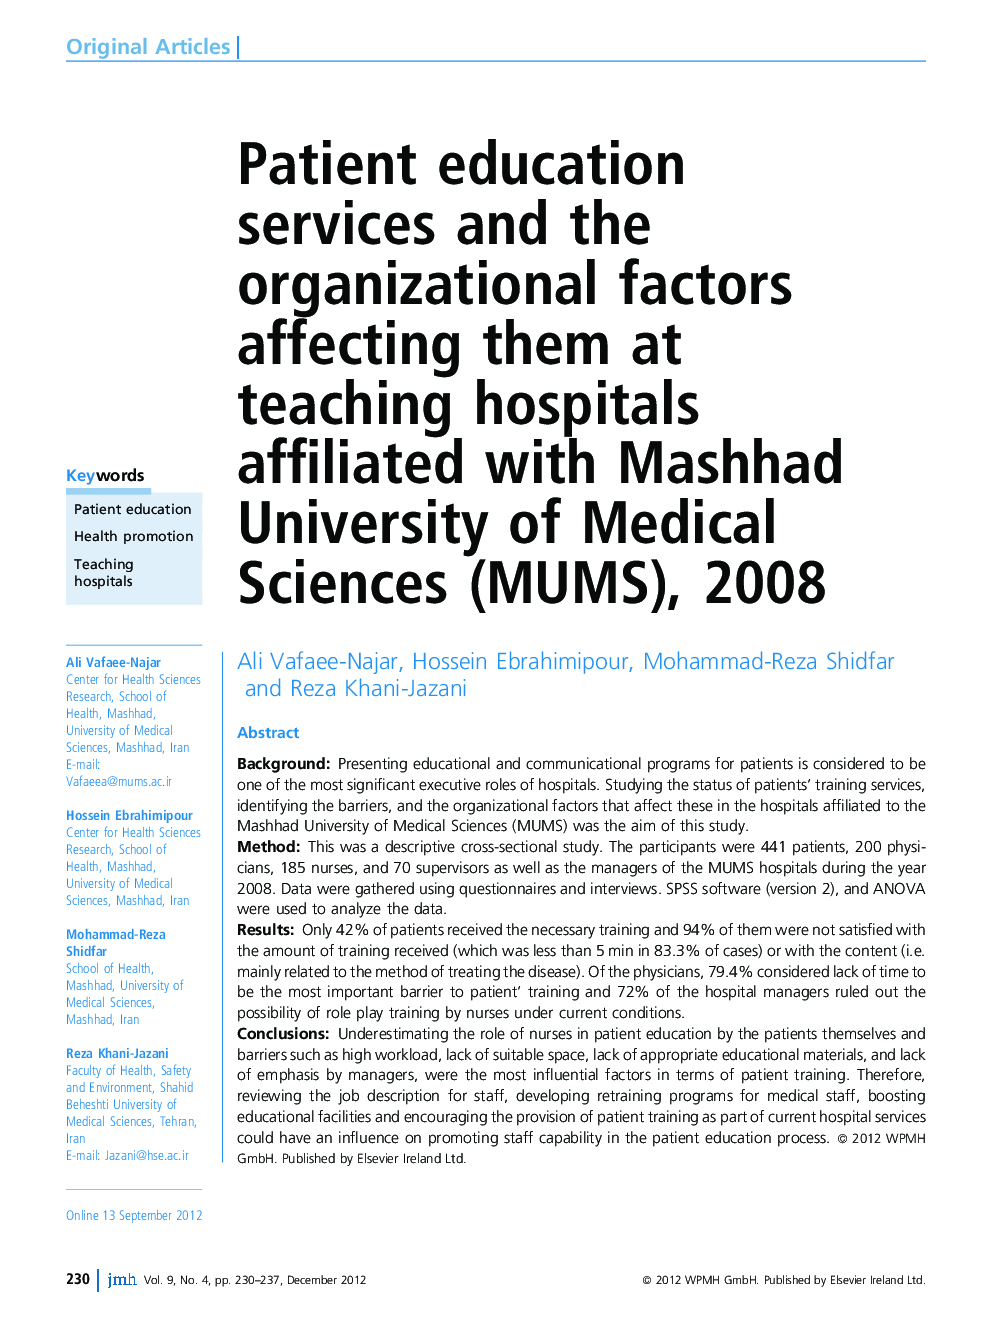 Patient education services and the organizational factors affecting them at teaching hospitals affiliated with Mashhad University of Medical Sciences (MUMS), 2008